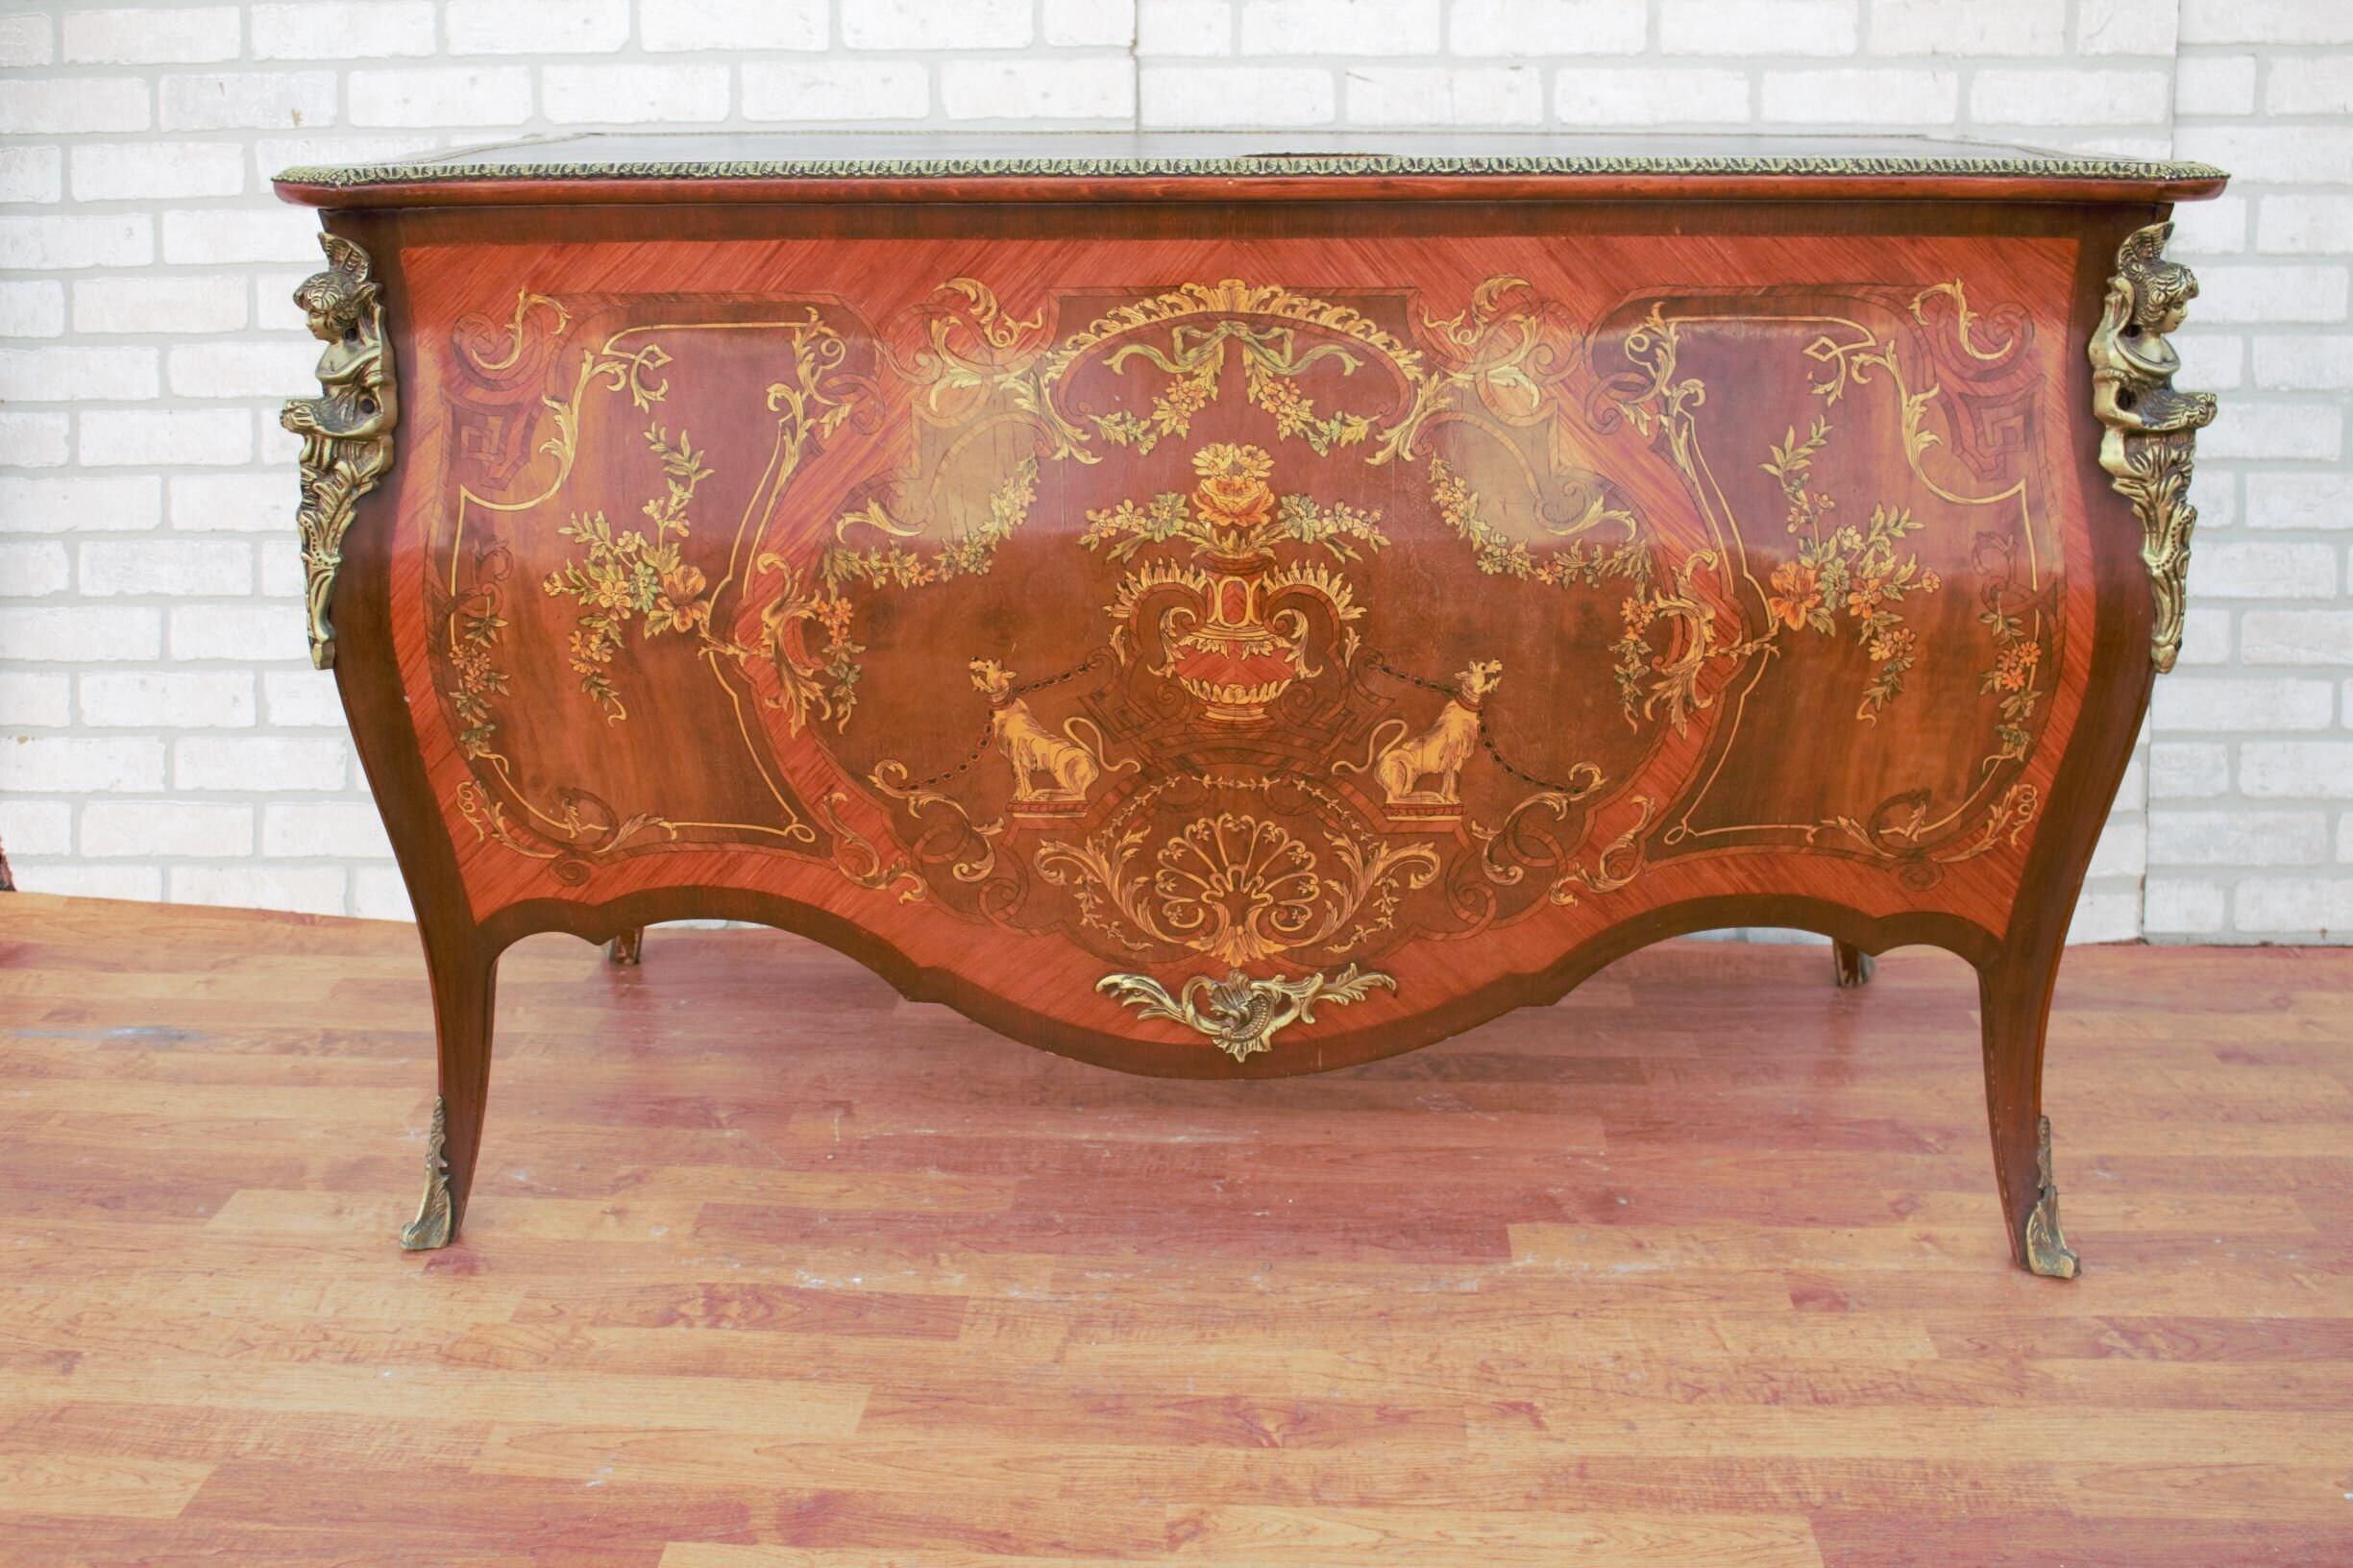 Antique French Louis XV Marquetry Style Mahogany Brass Ormolu Mounted Bombe Leather Top Desk

A unique French Louis XV style ornate ormolu gilt mounted figural desk. The desk has a bombe style look to it. Very different compared to the desks we